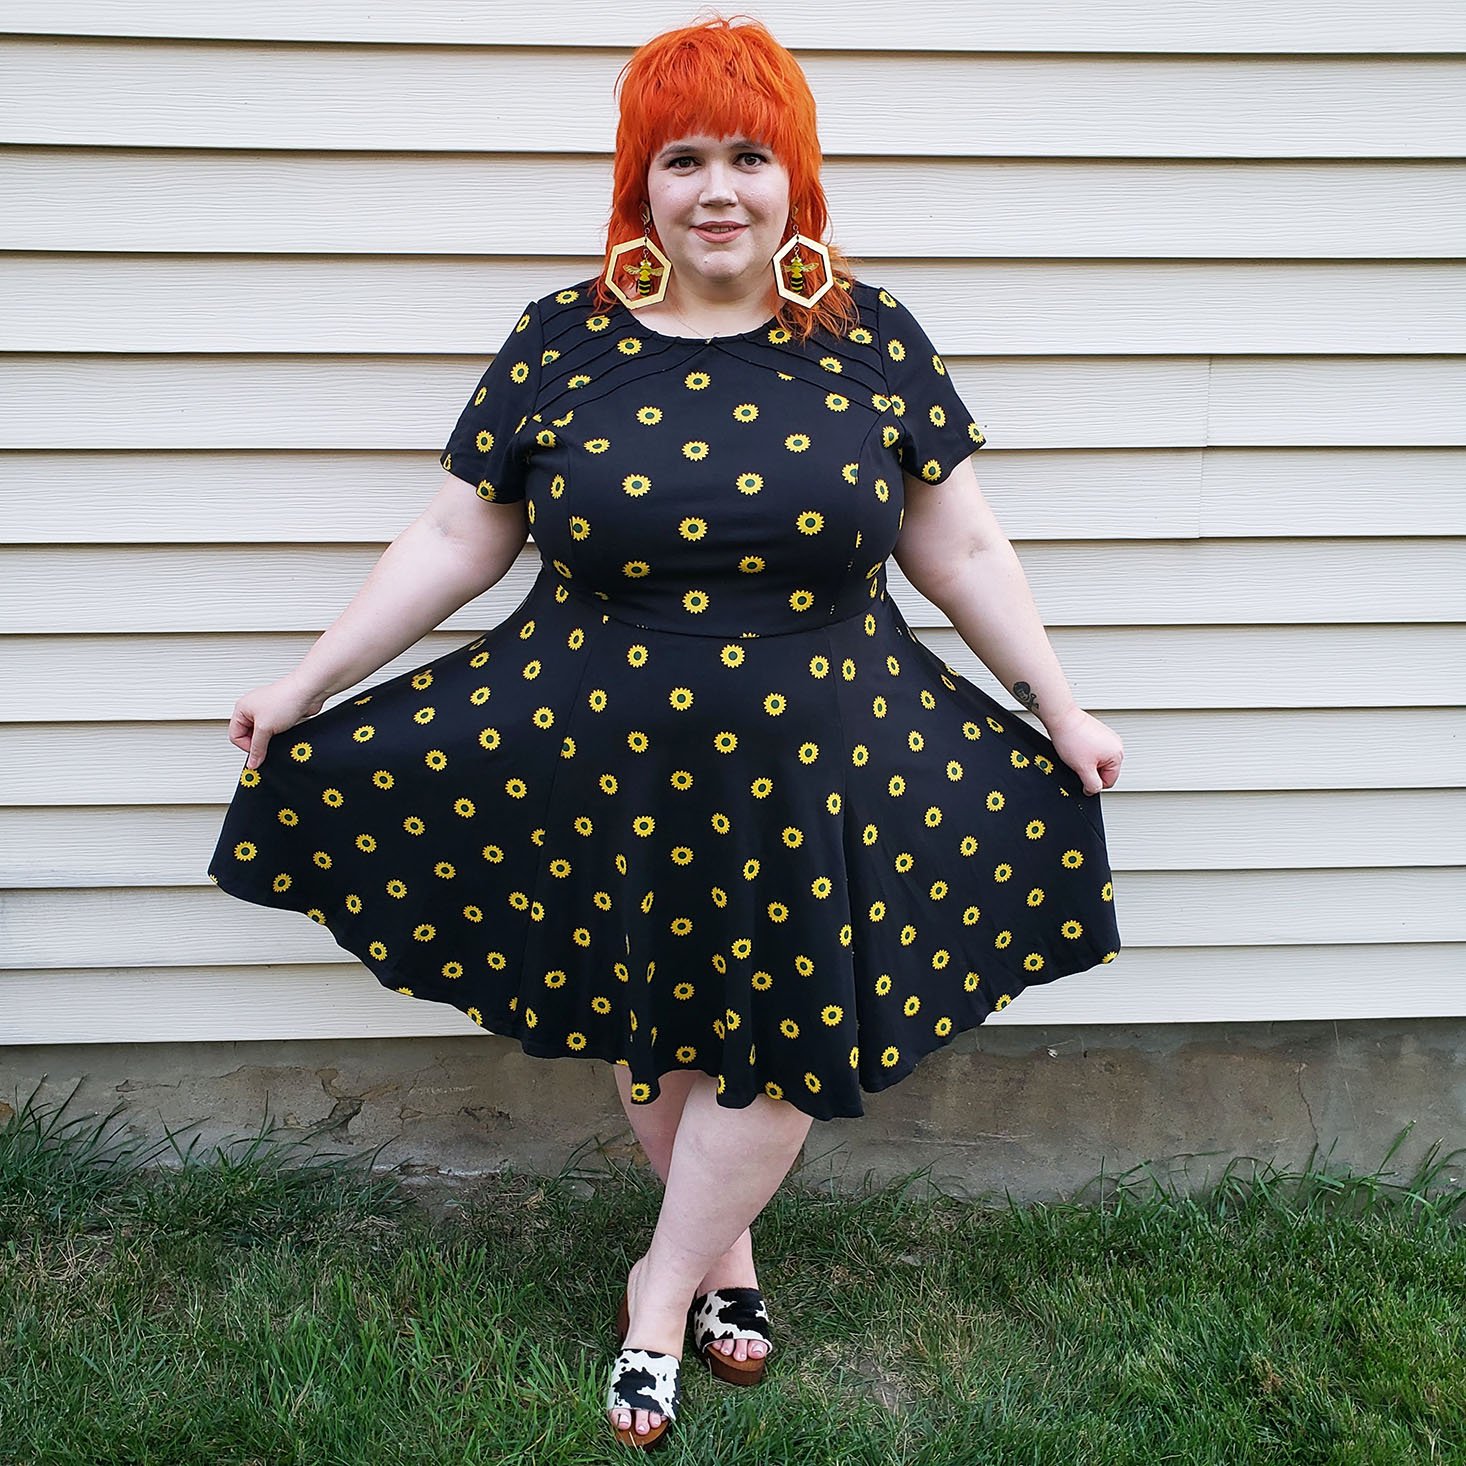 Gwynnie Bee Plus Size Clothing October 2021 Review + Coupon